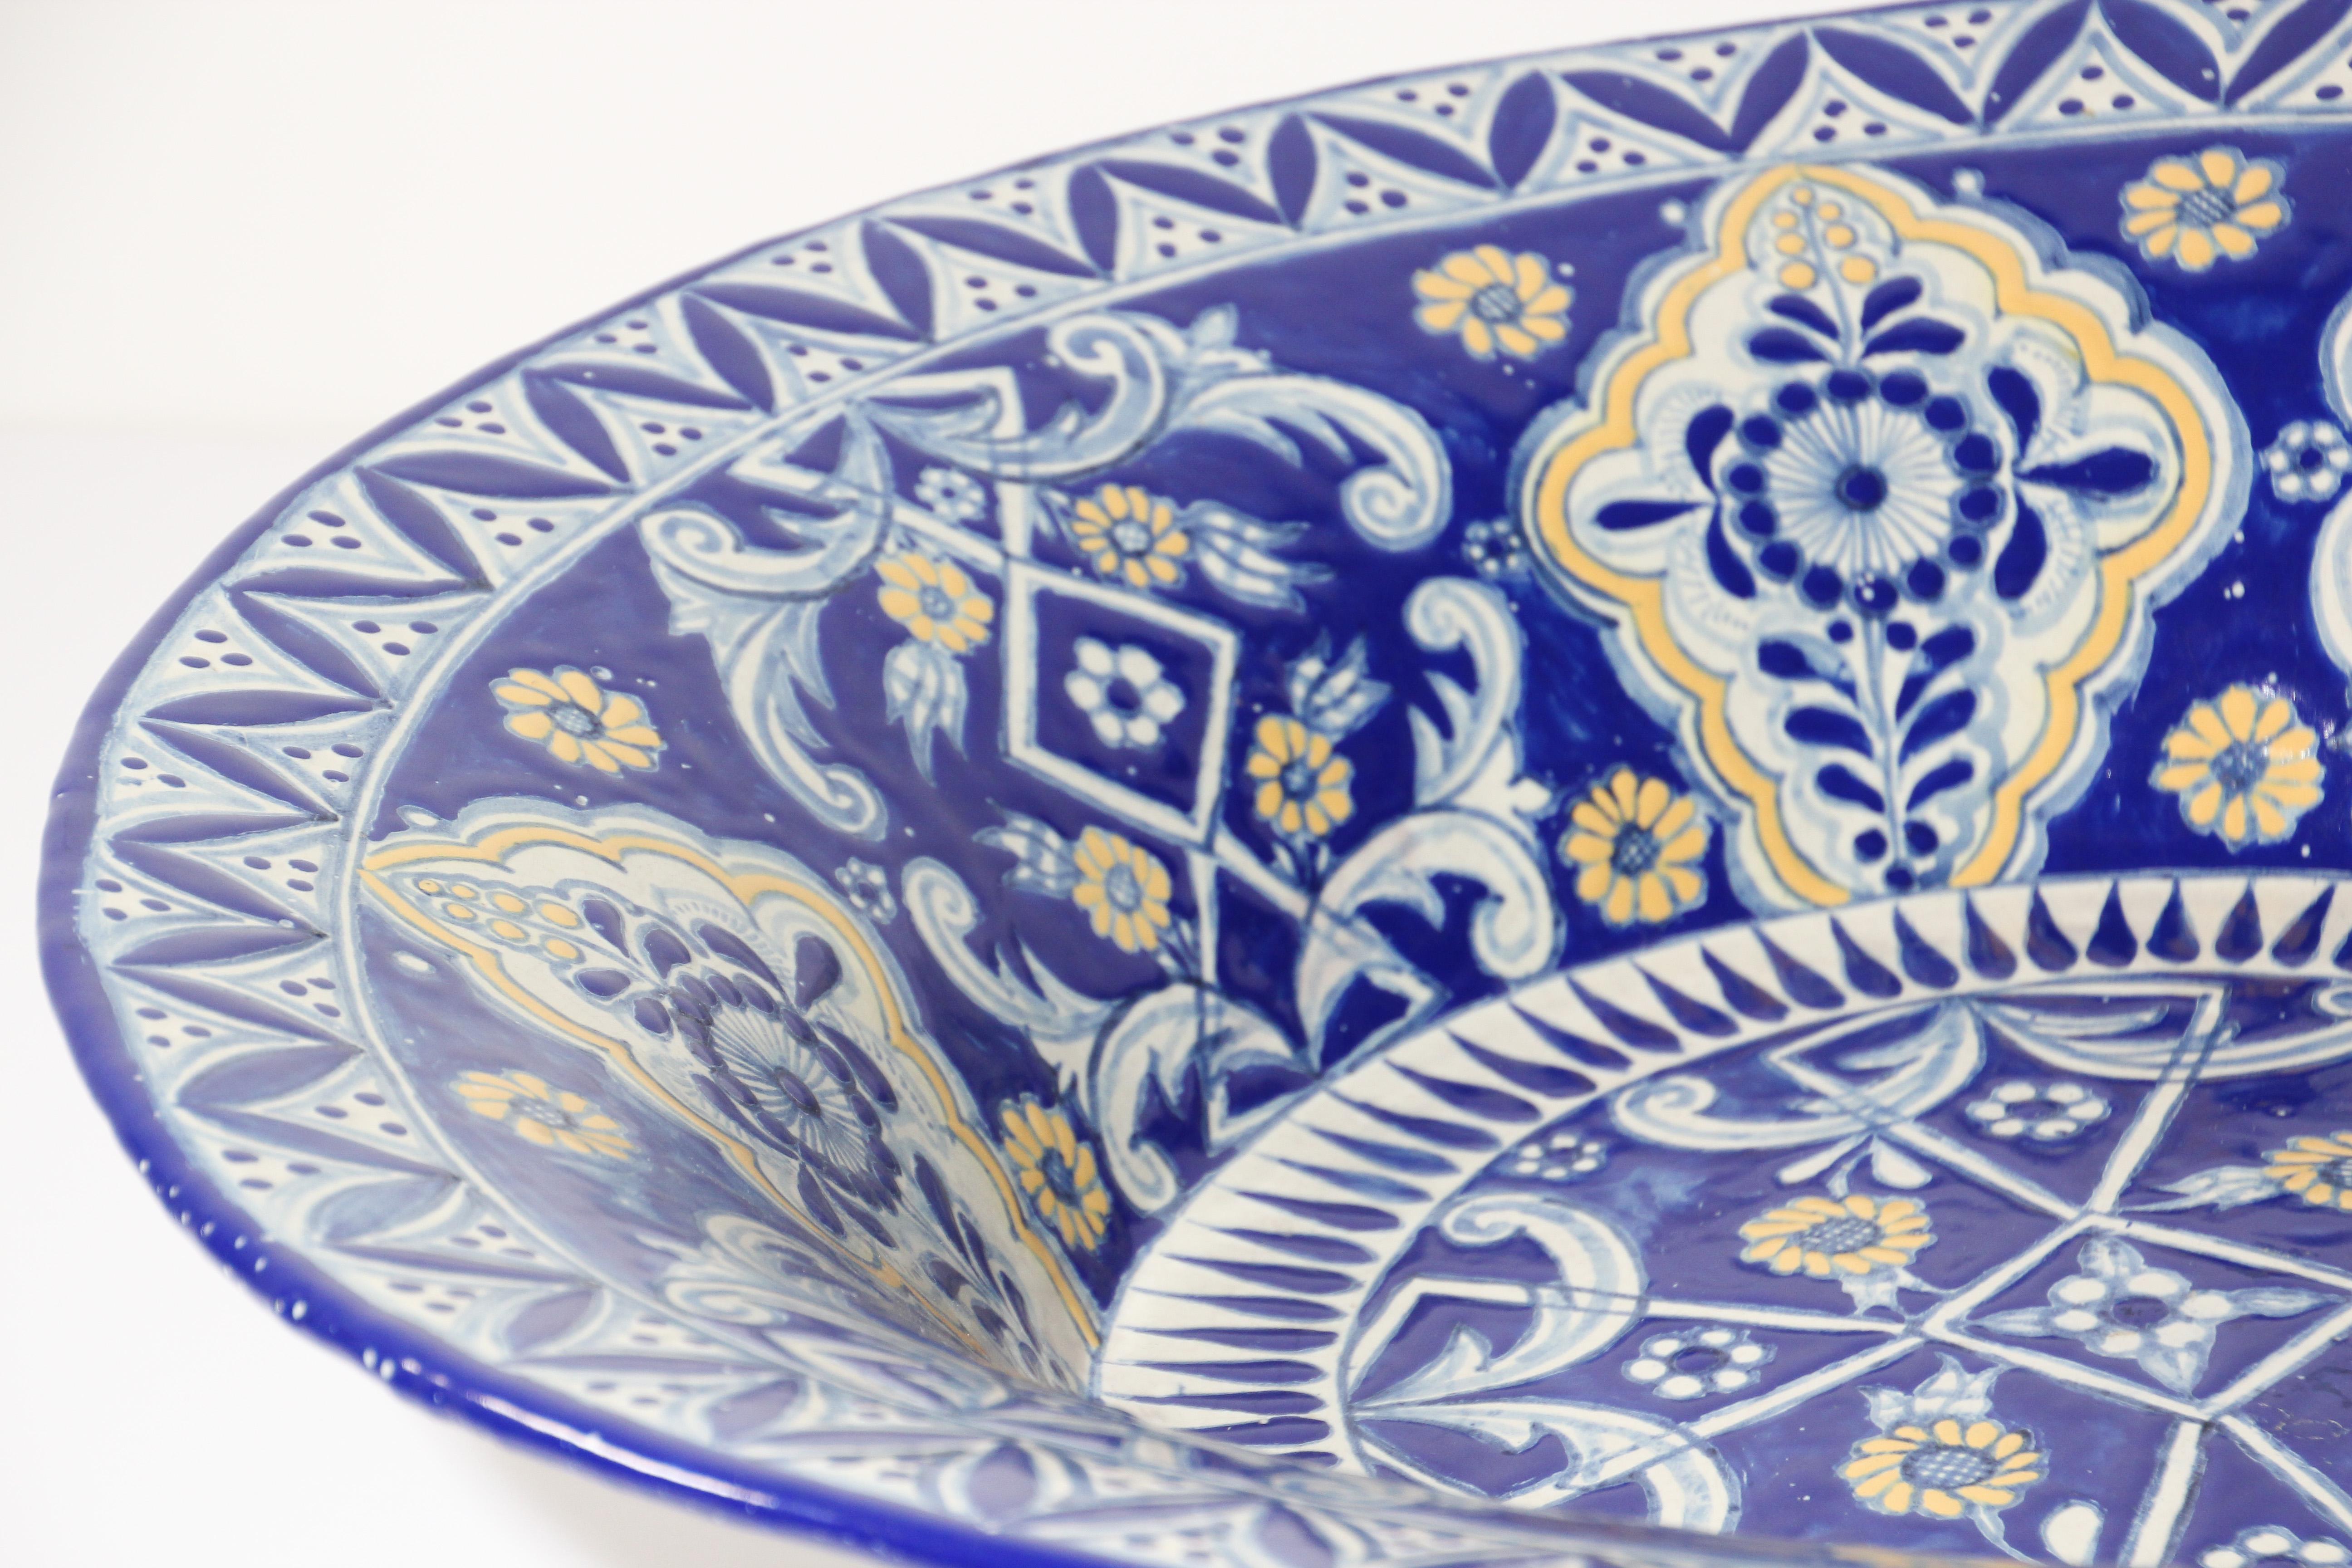 Hand-Painted Oversized Blue and White Mexican Talavera Glazed Ceramic Bowl